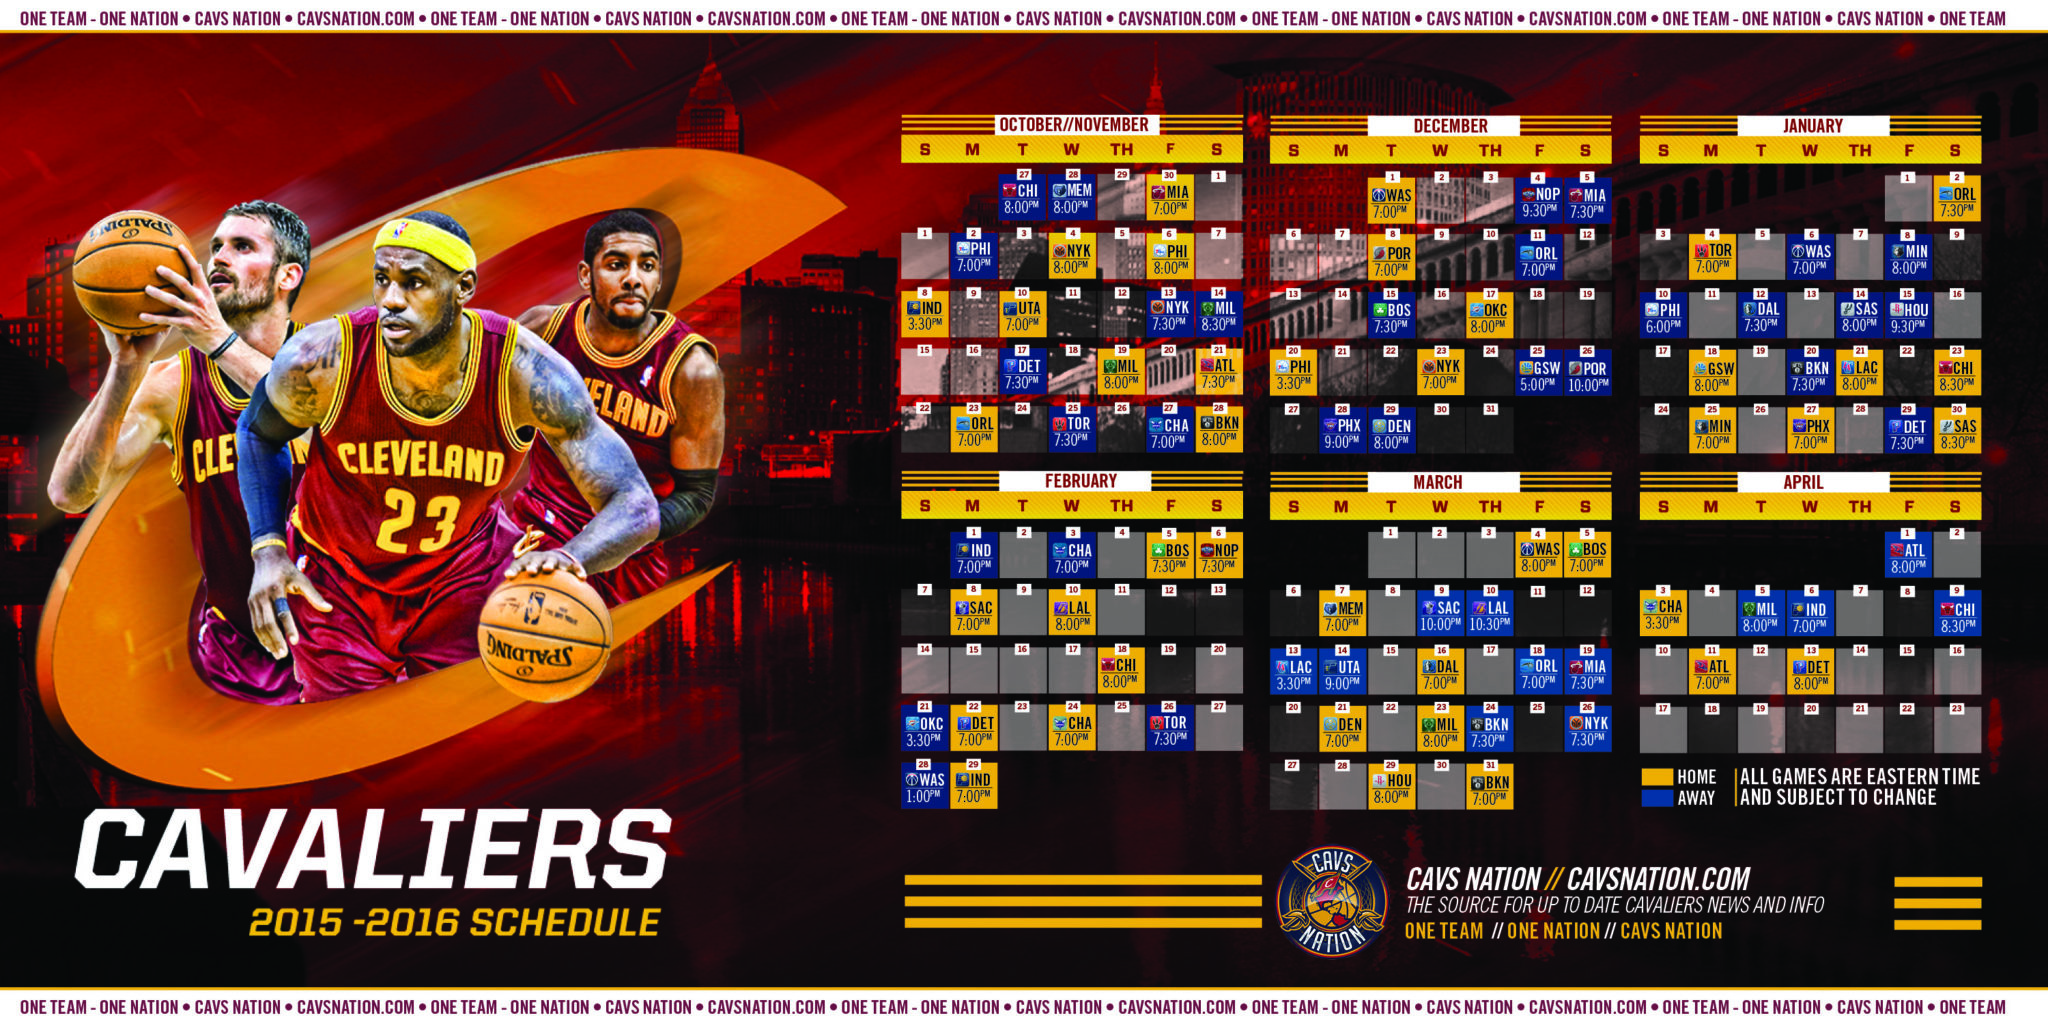 Download The Official Cavs Nation Home And Away Calendar